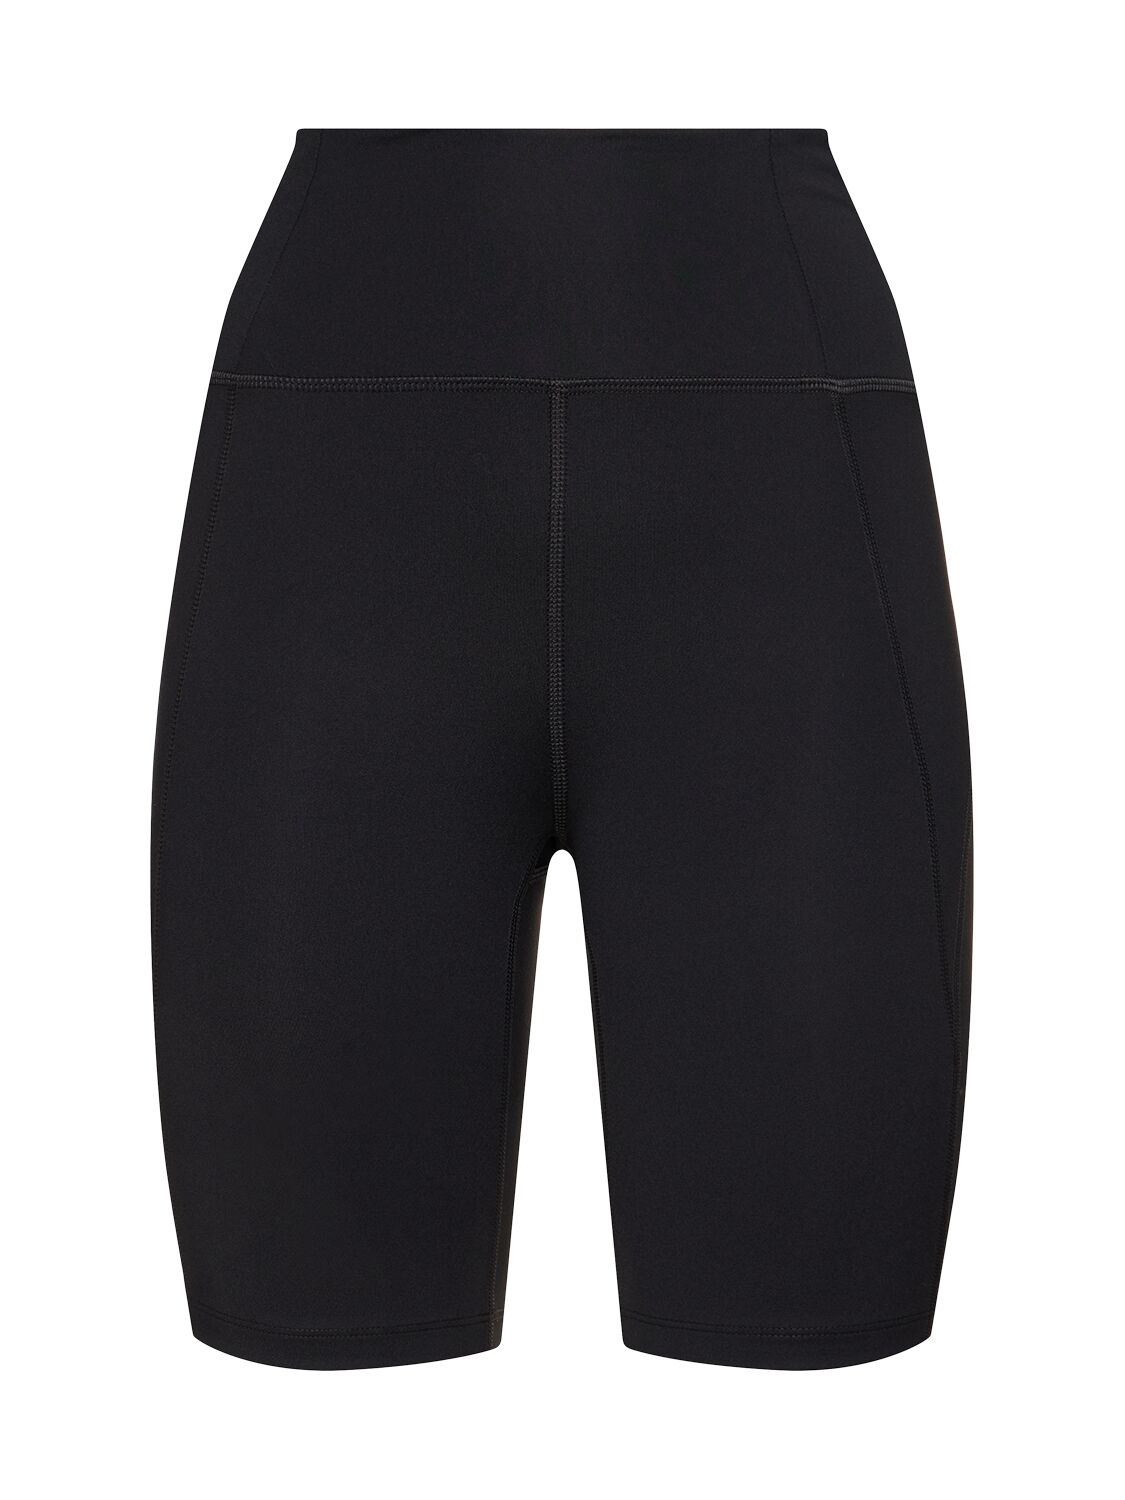 Girlfriend Collective High Rise Stretch Tech Running Shorts In Black